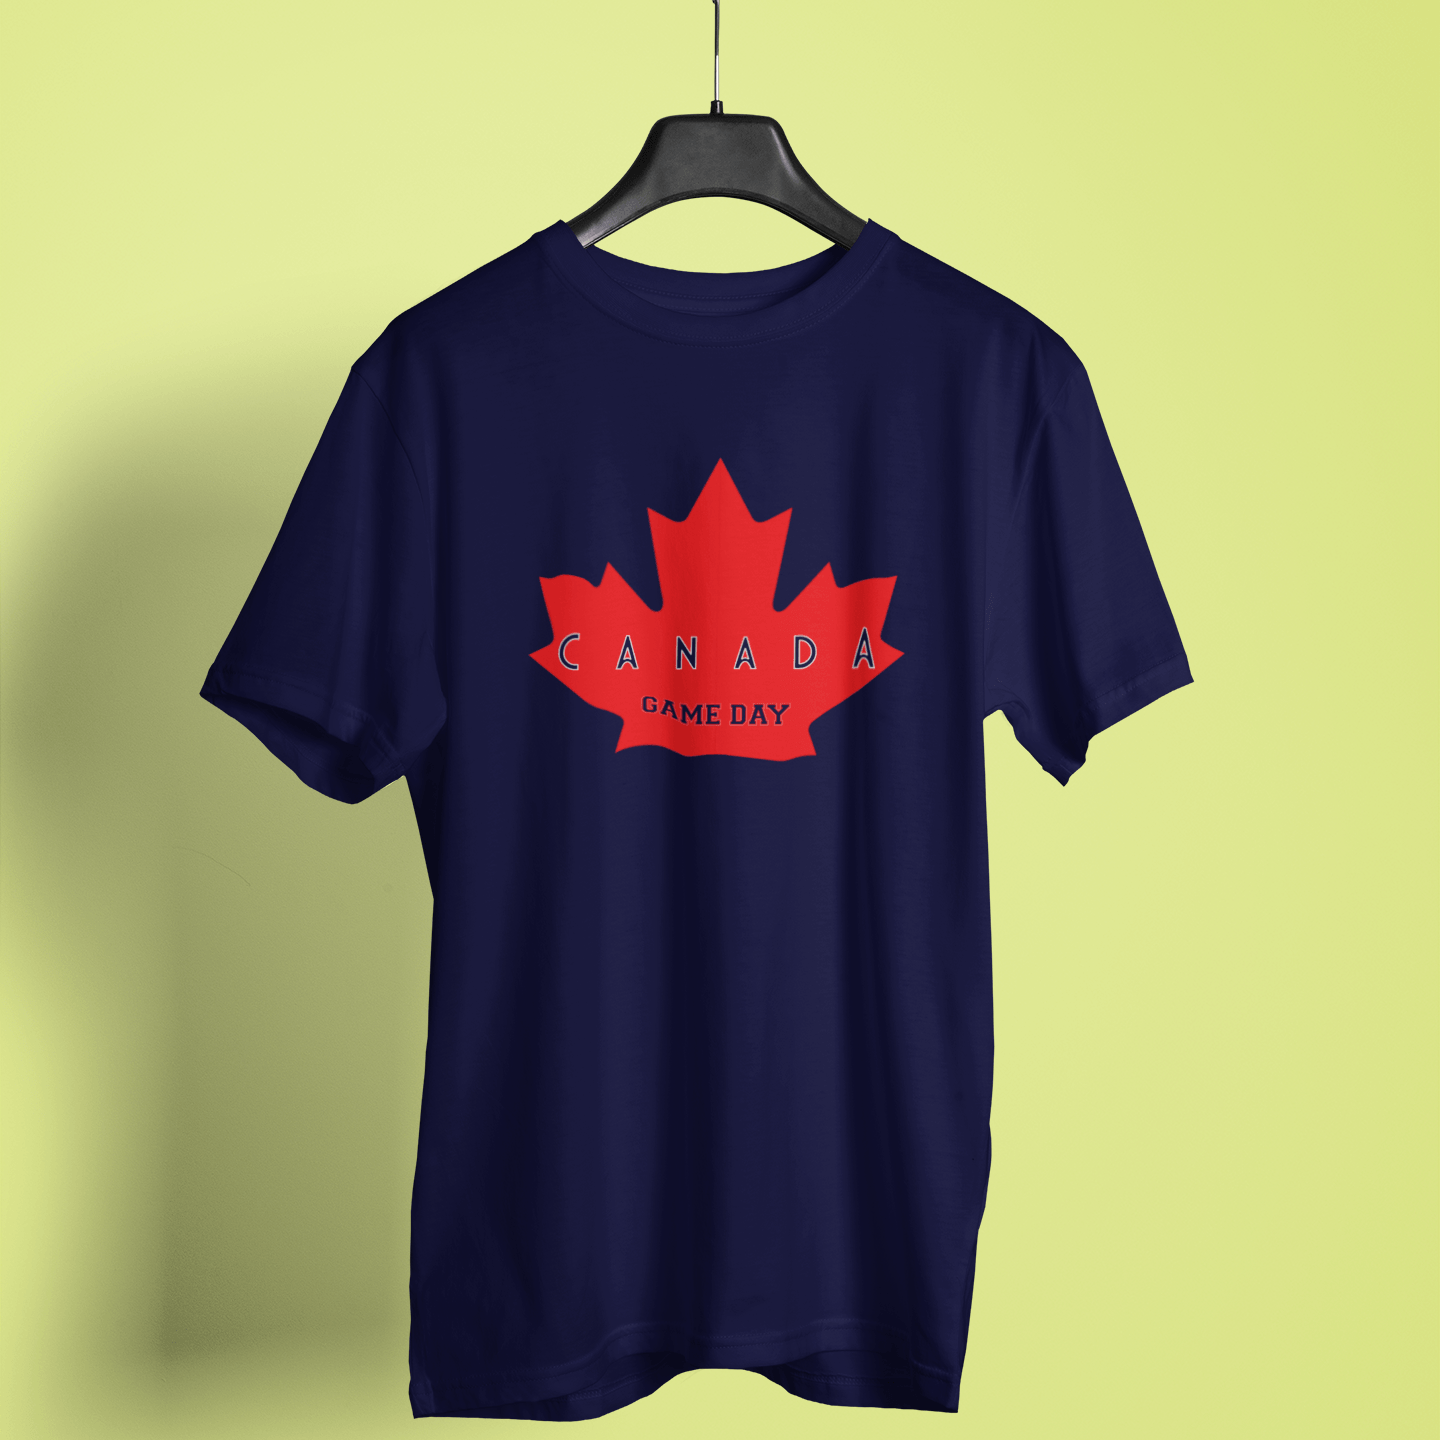 Canada Game Day Unisex T-shirt